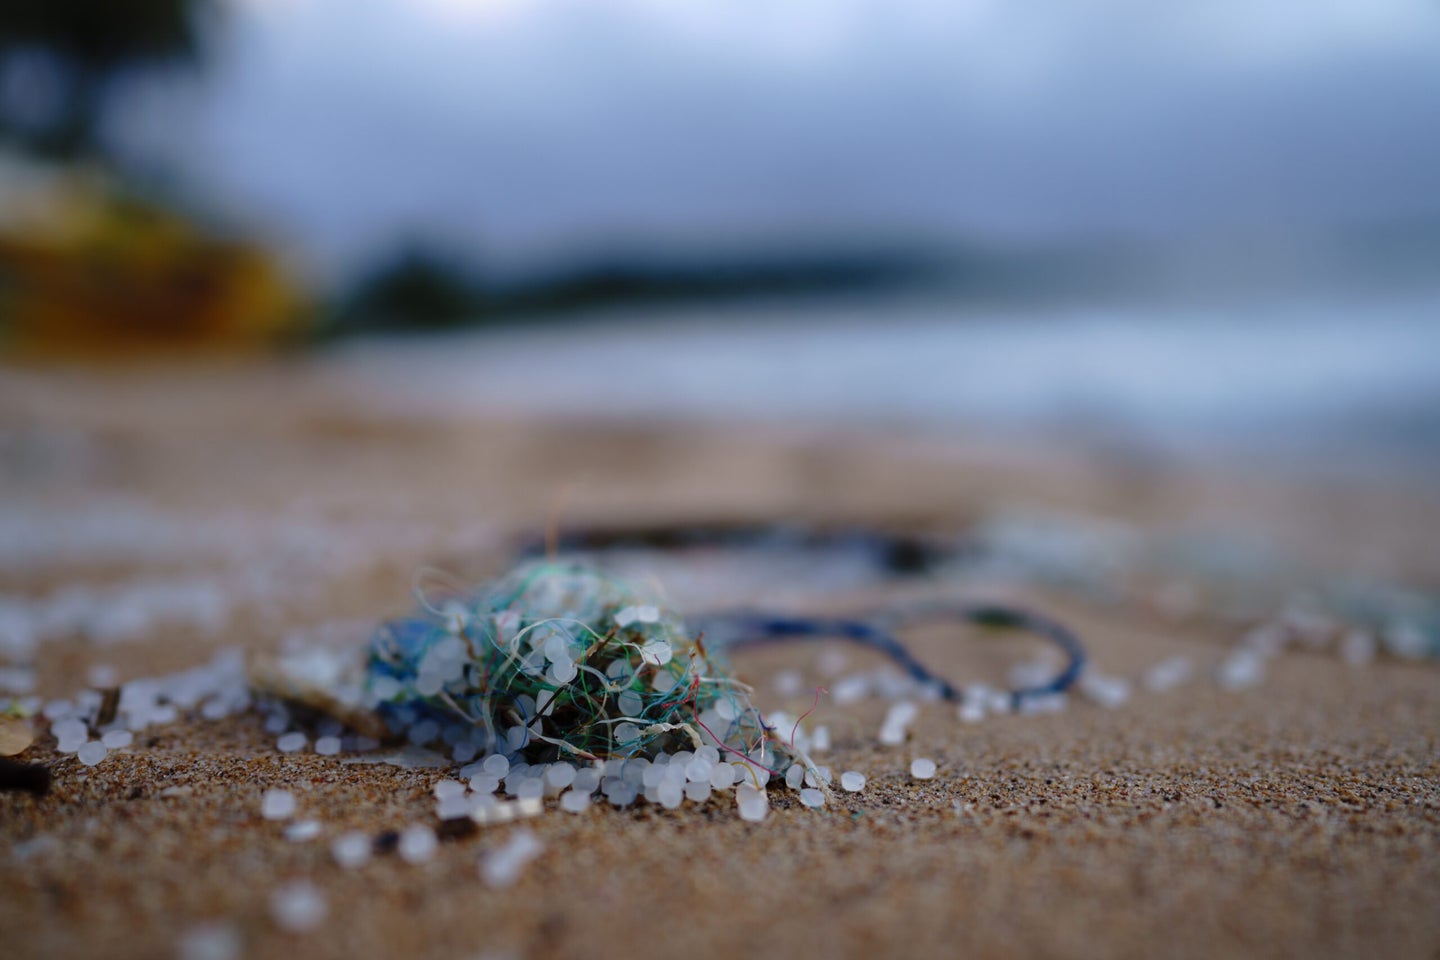 Microplastic pellets on the beach.